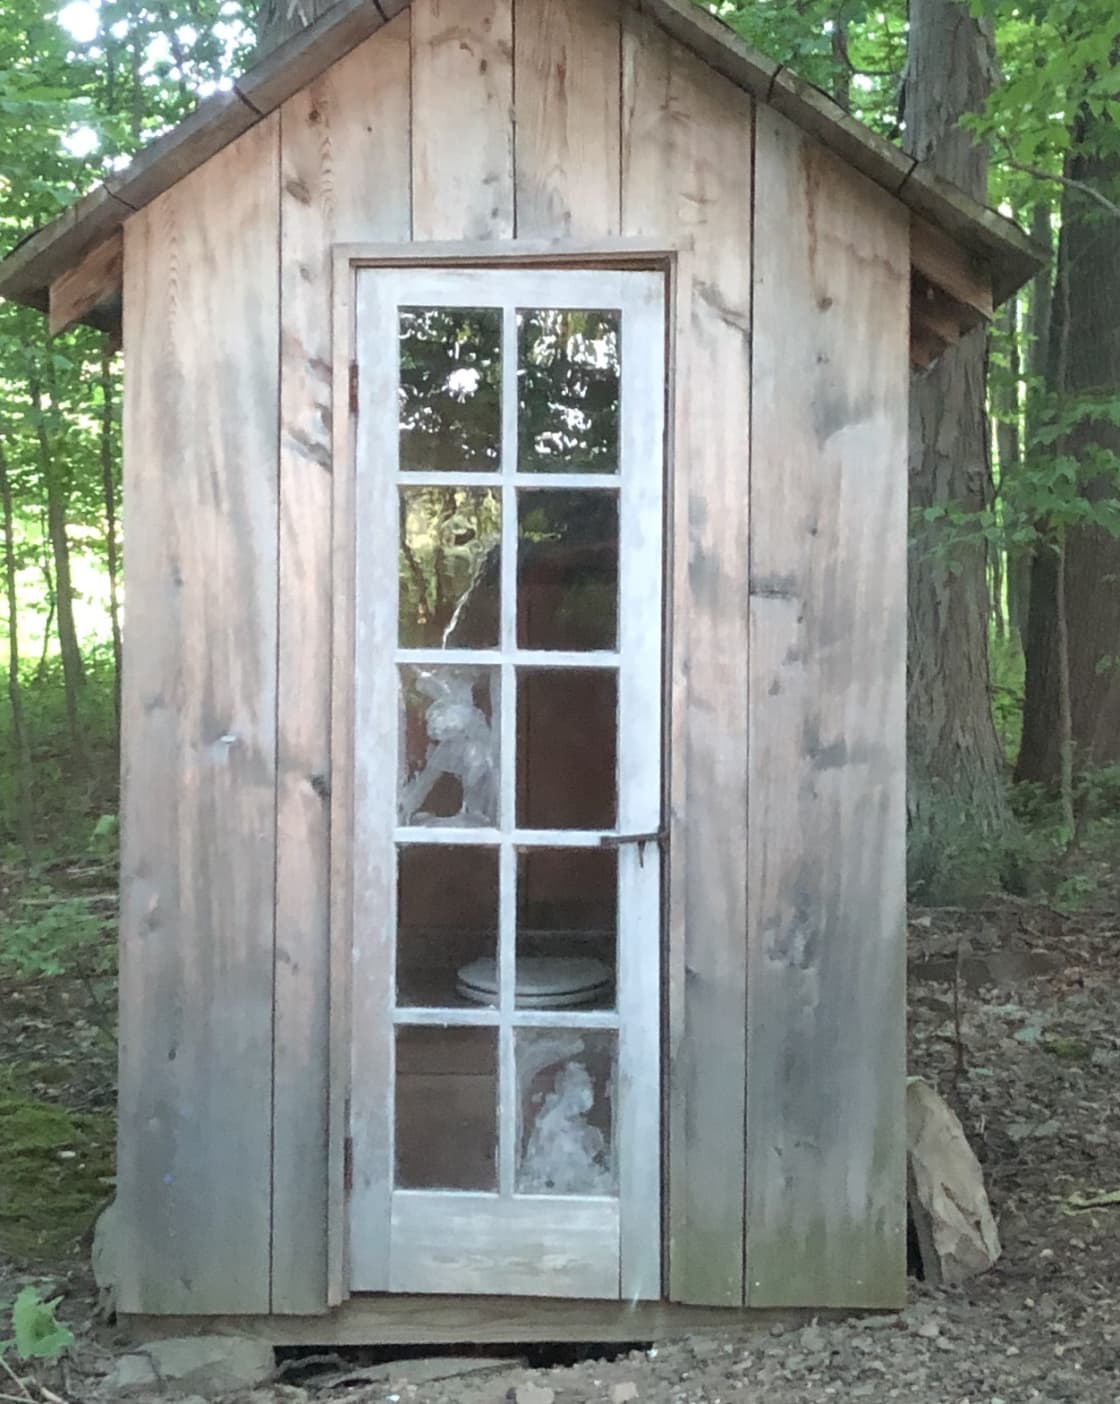 View of the outhouse.